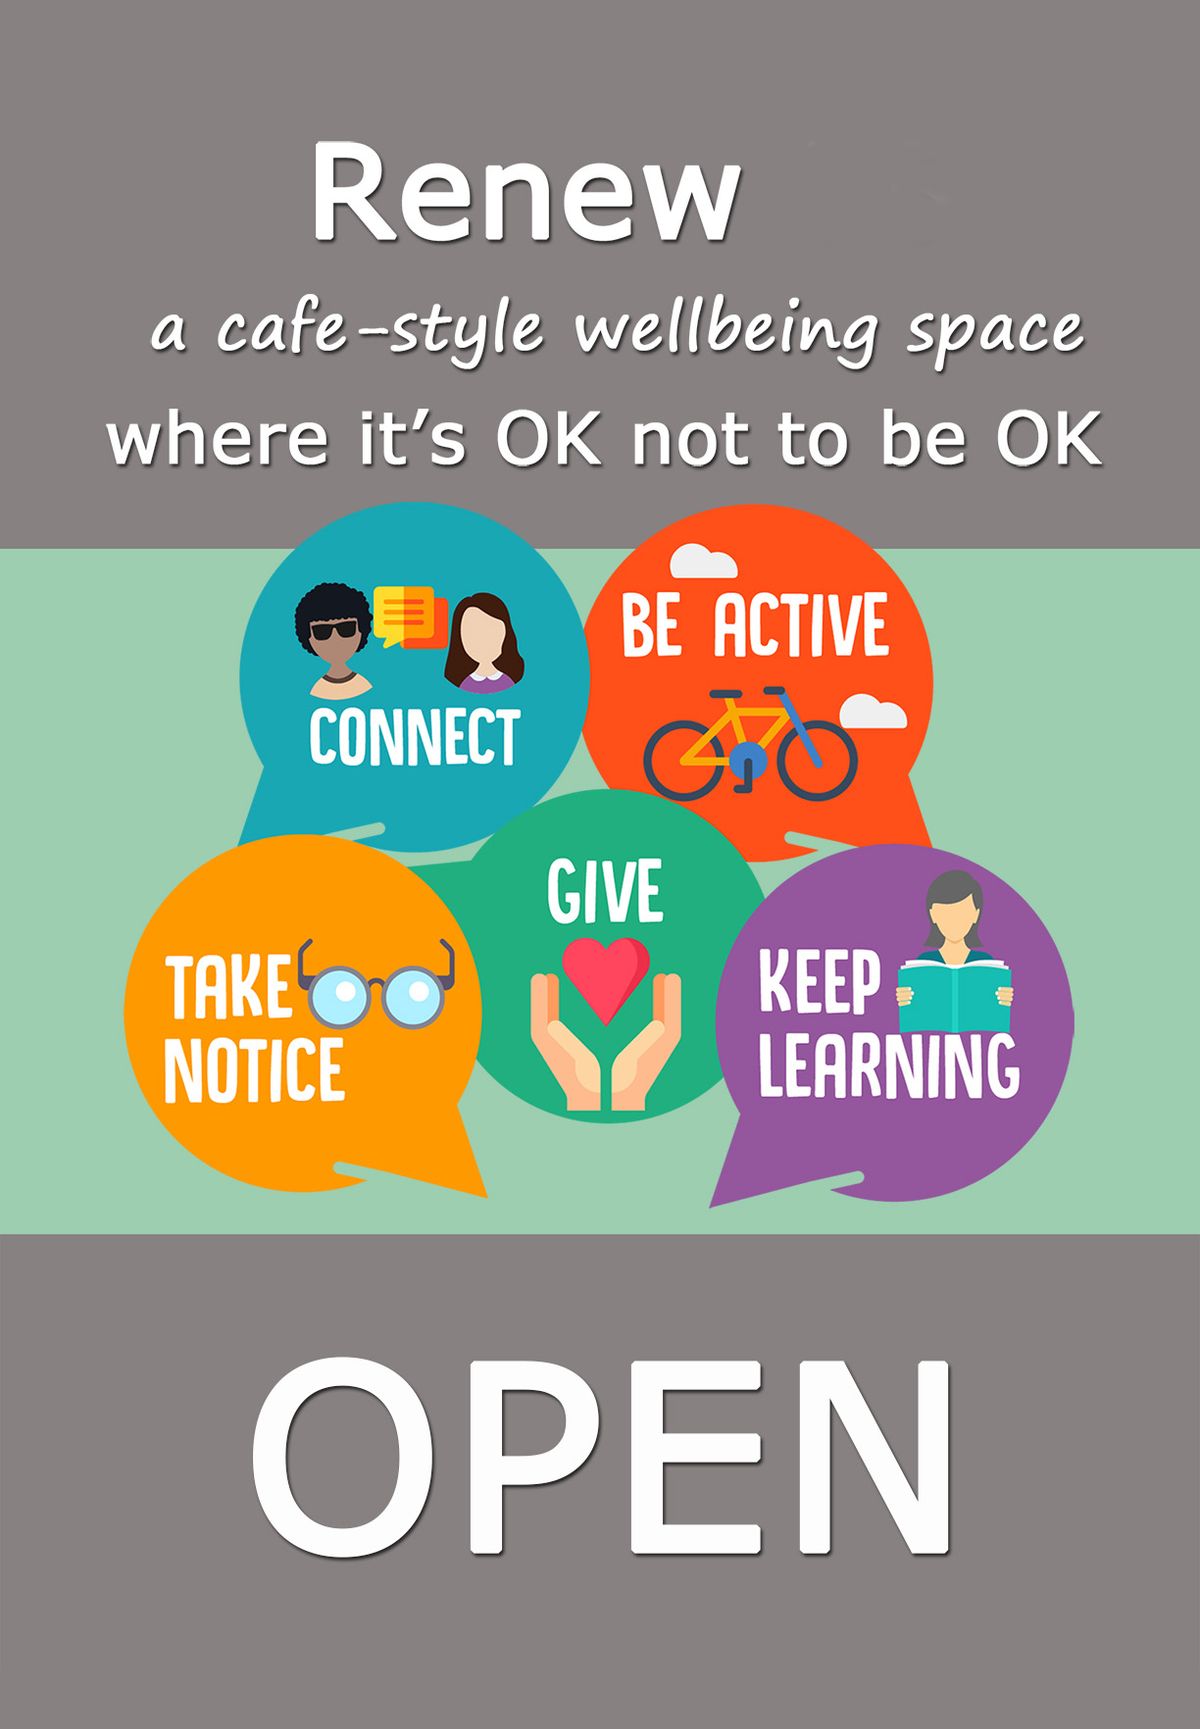 Renew Wellbeing - Wellbeing Space